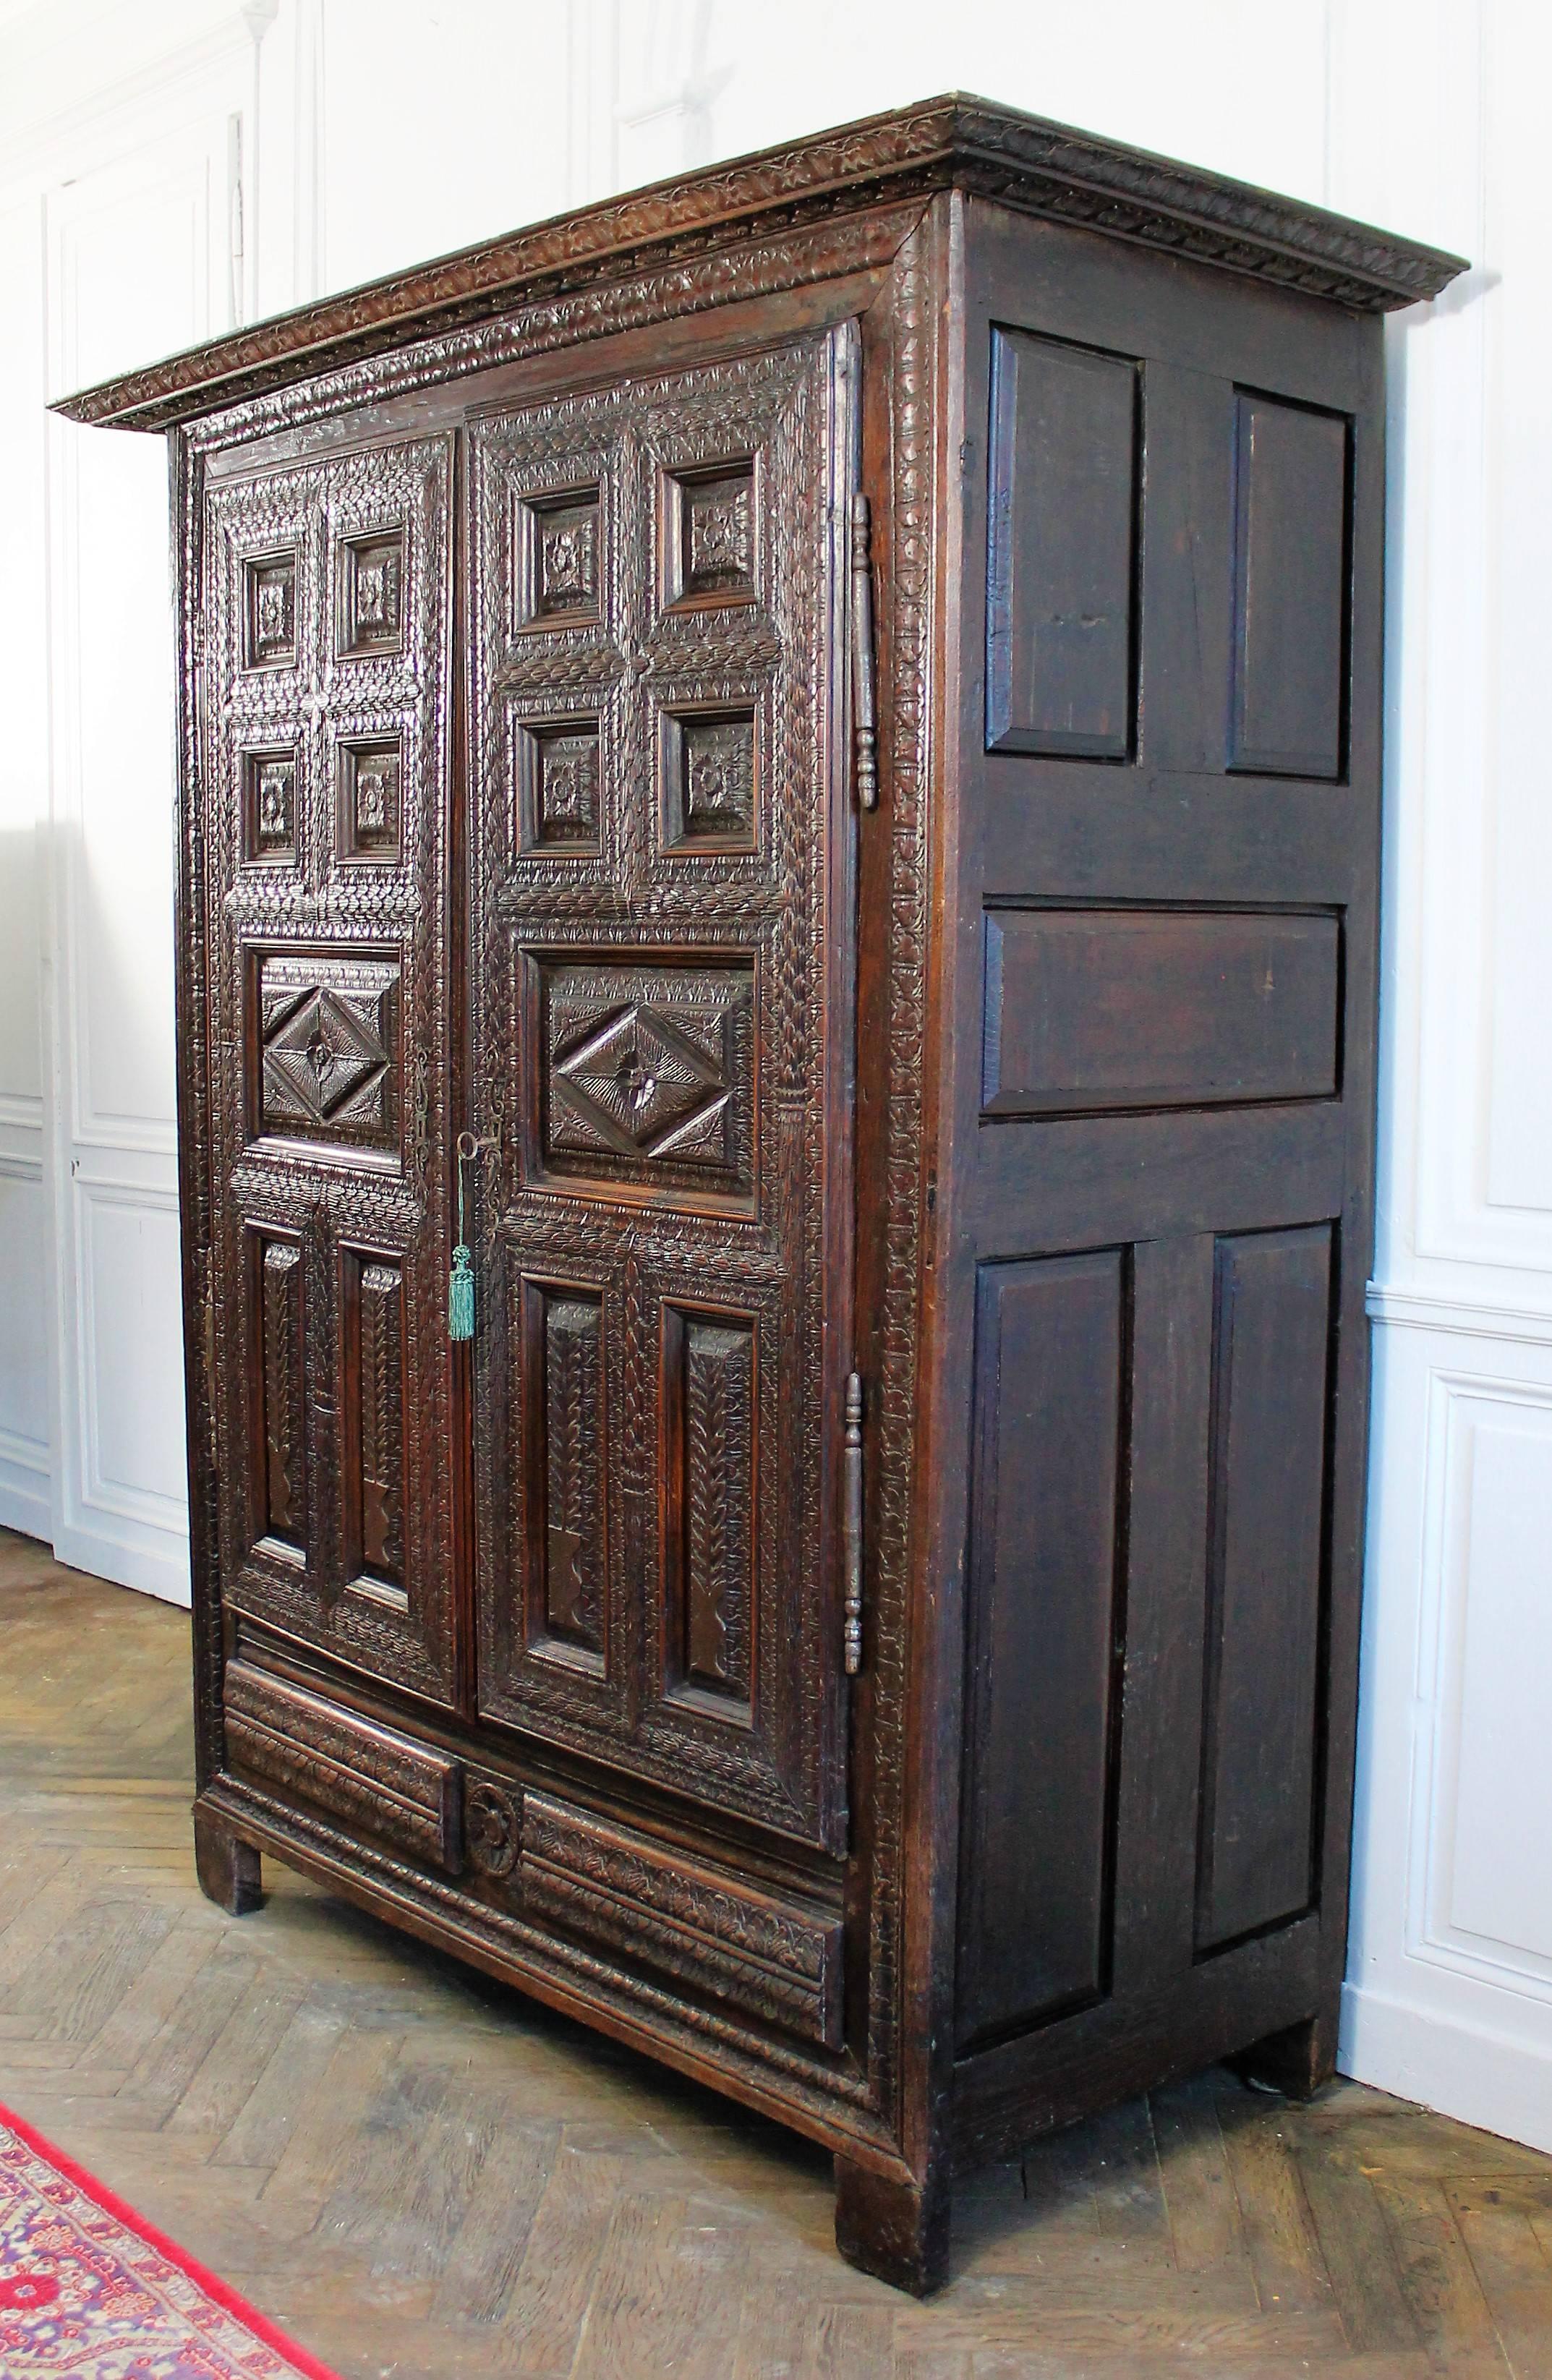 17th century carved chataignier wood opening with two doors in front, molded and richly hand-carved. The doors are parquet and compartmentalized in several reserves: four in the upper part with flower motifs, a central panel also with floral